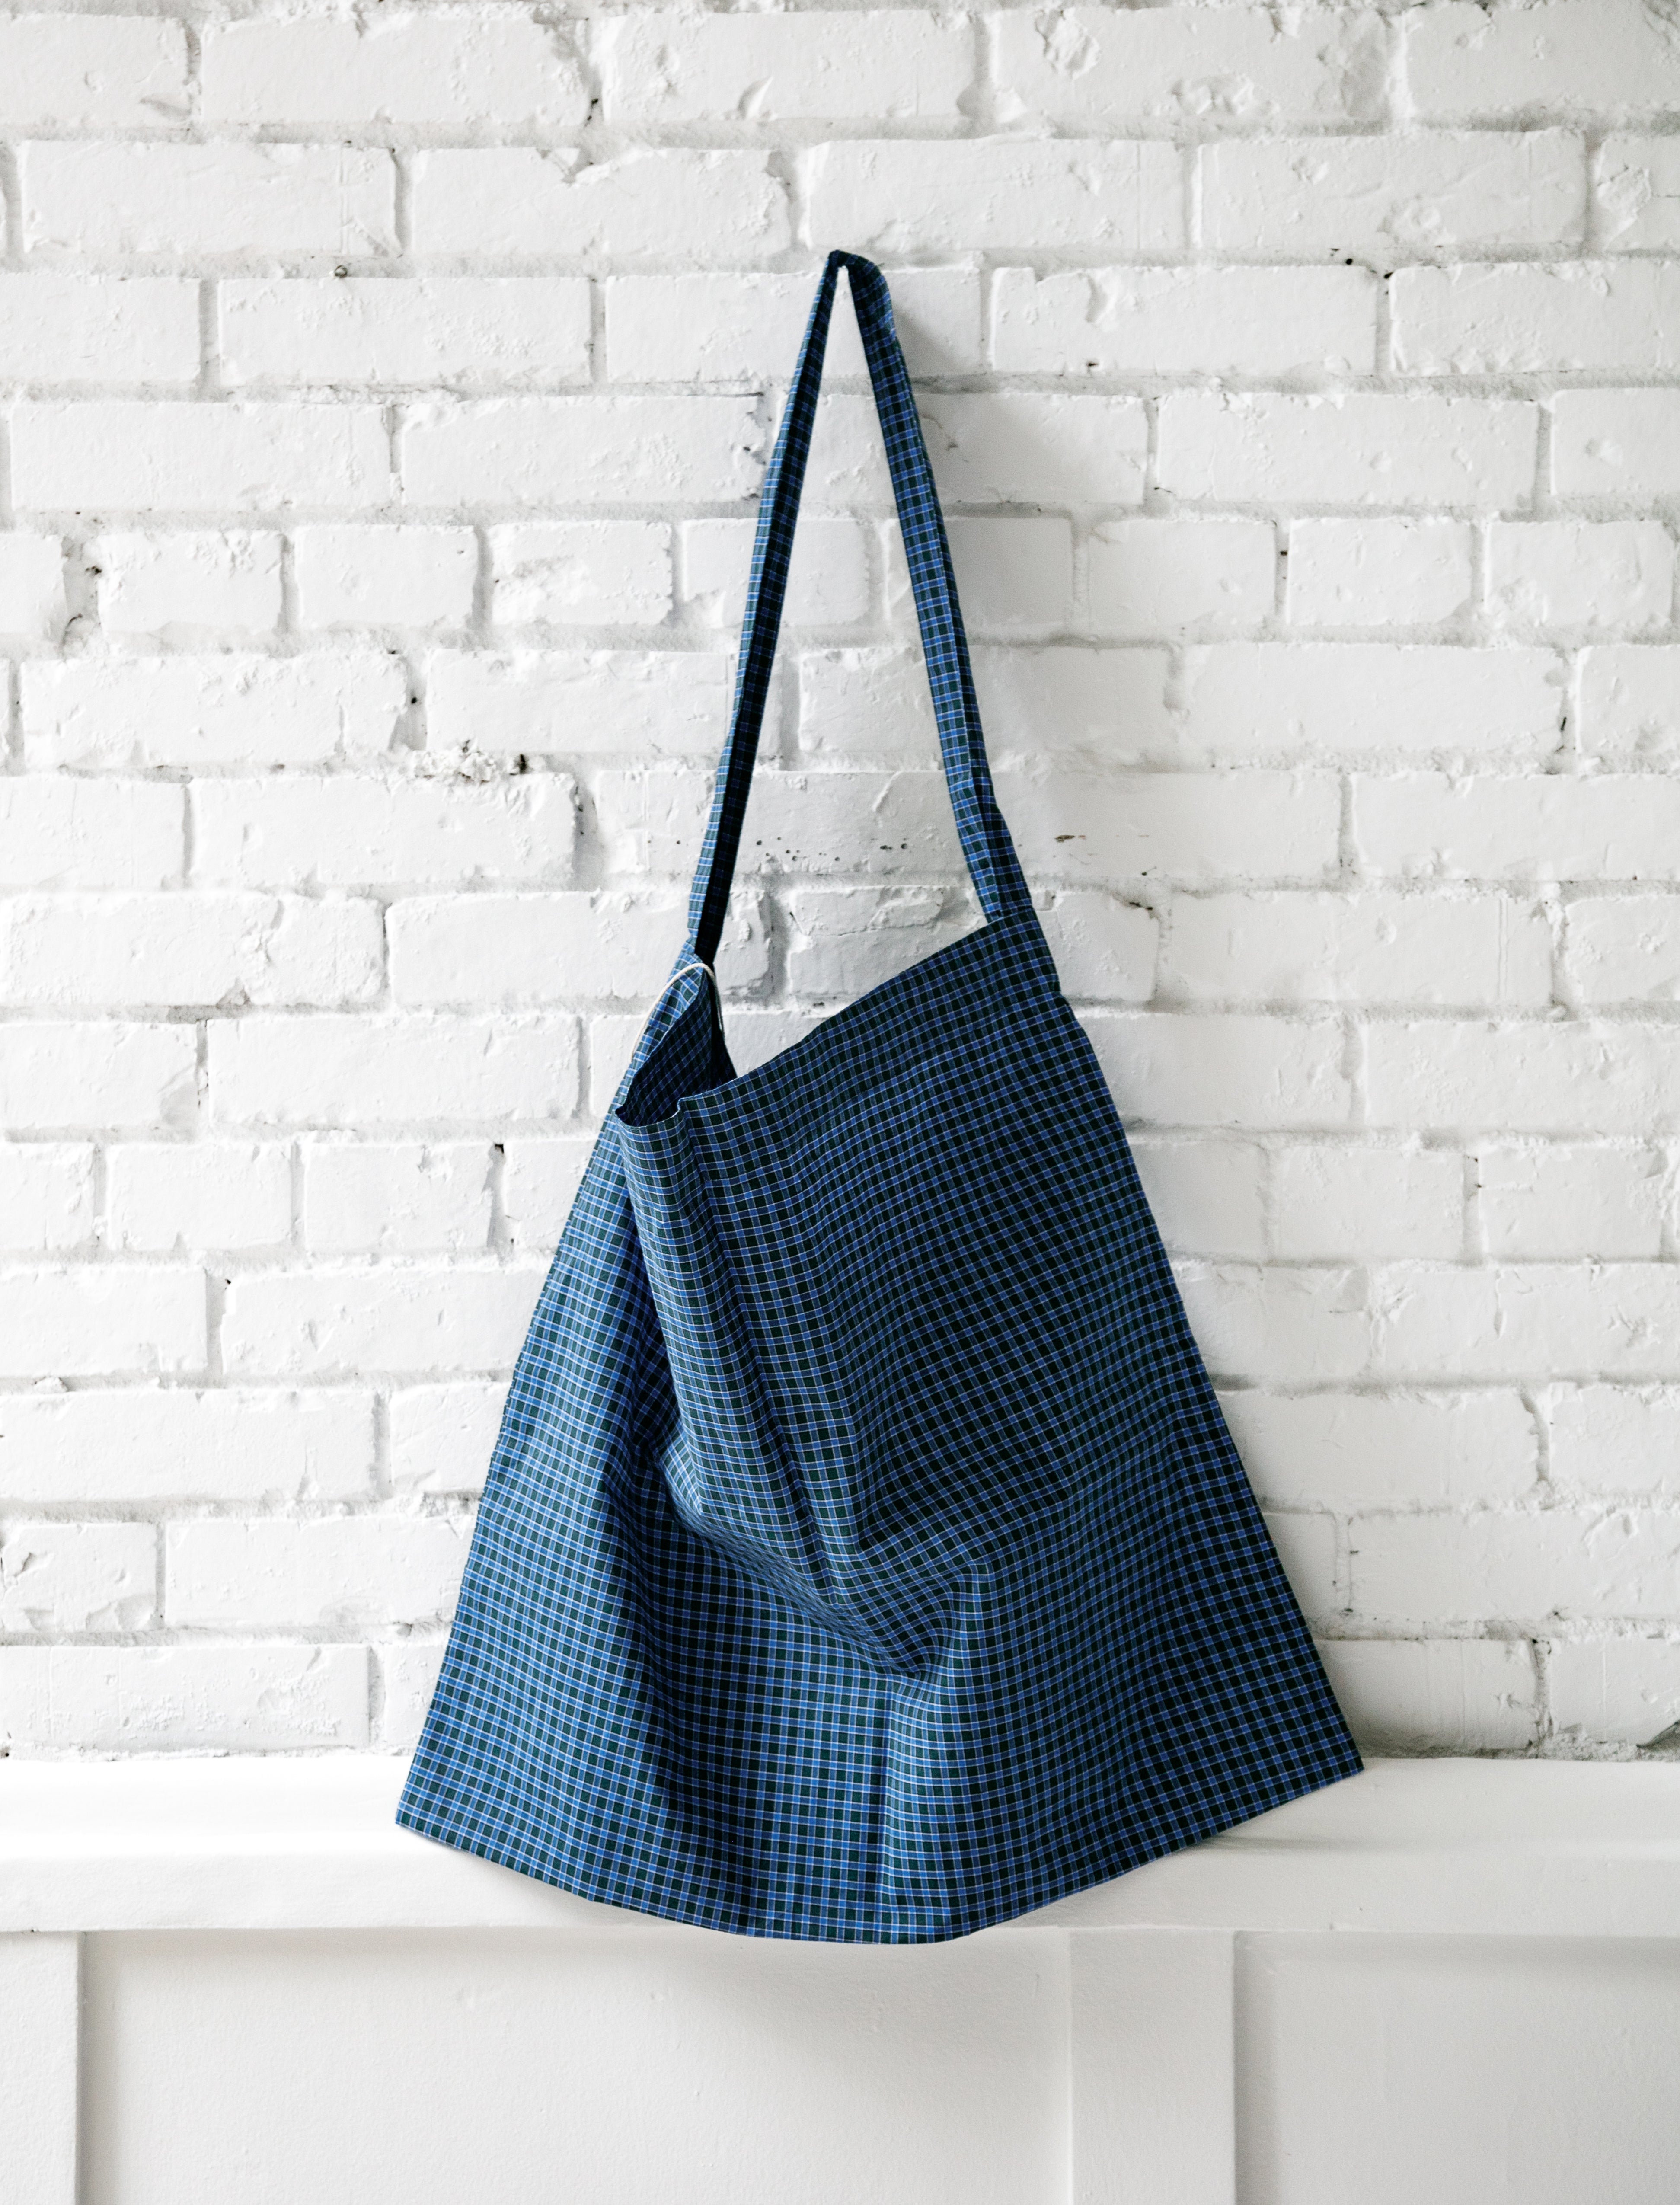 Minimalist Simple Leather Tote Bag – Gifts for Designers